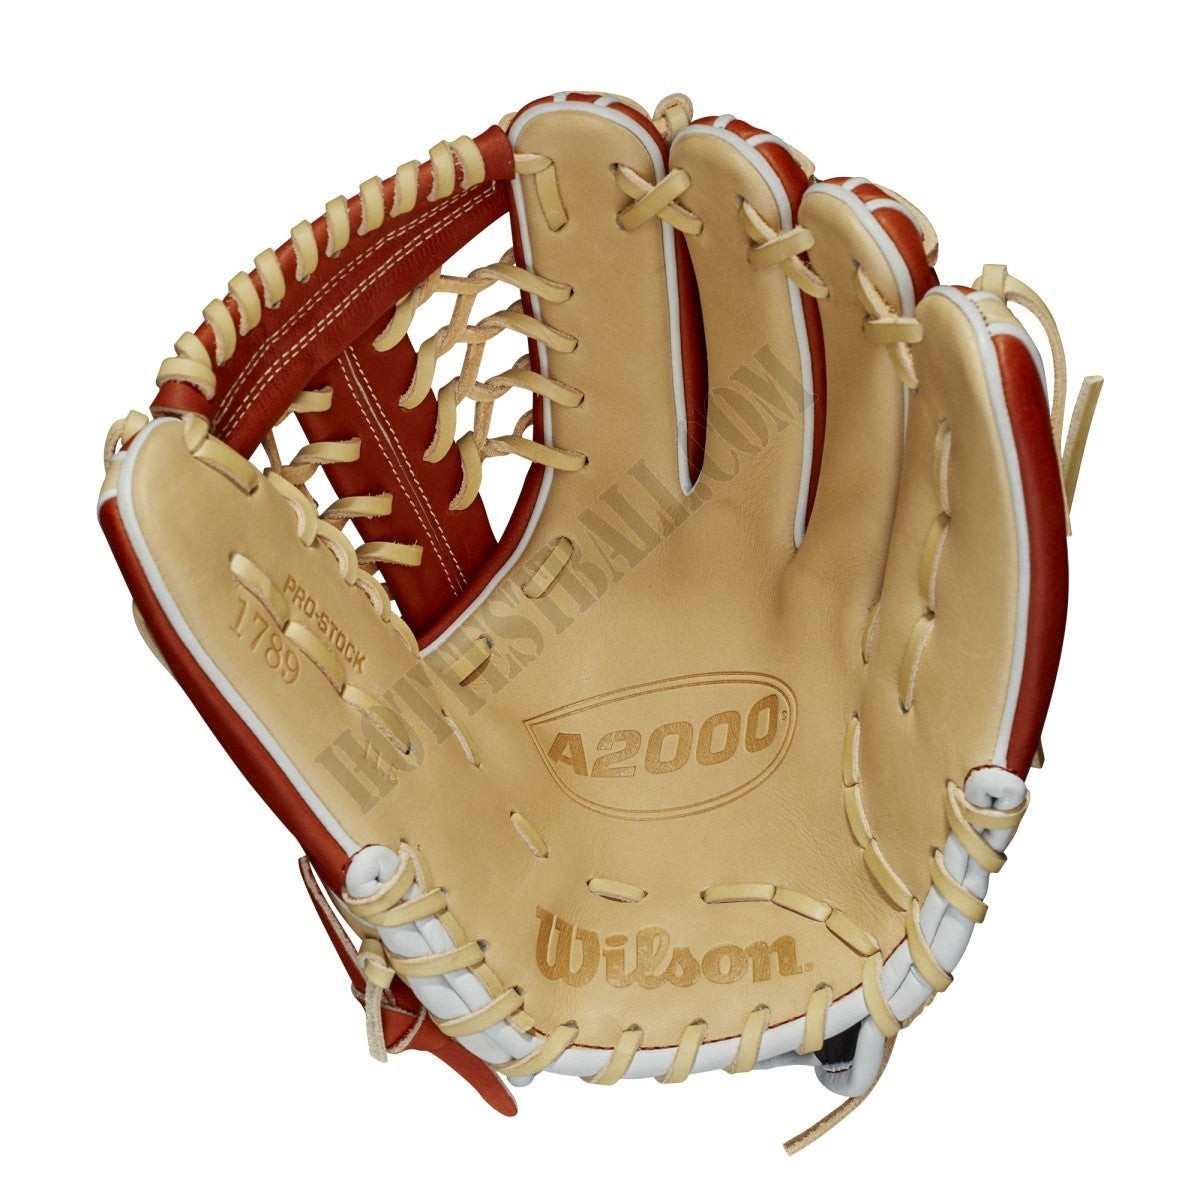 2021 A2000 1789 11.5" Utility Baseball Glove ● Wilson Promotions - -2